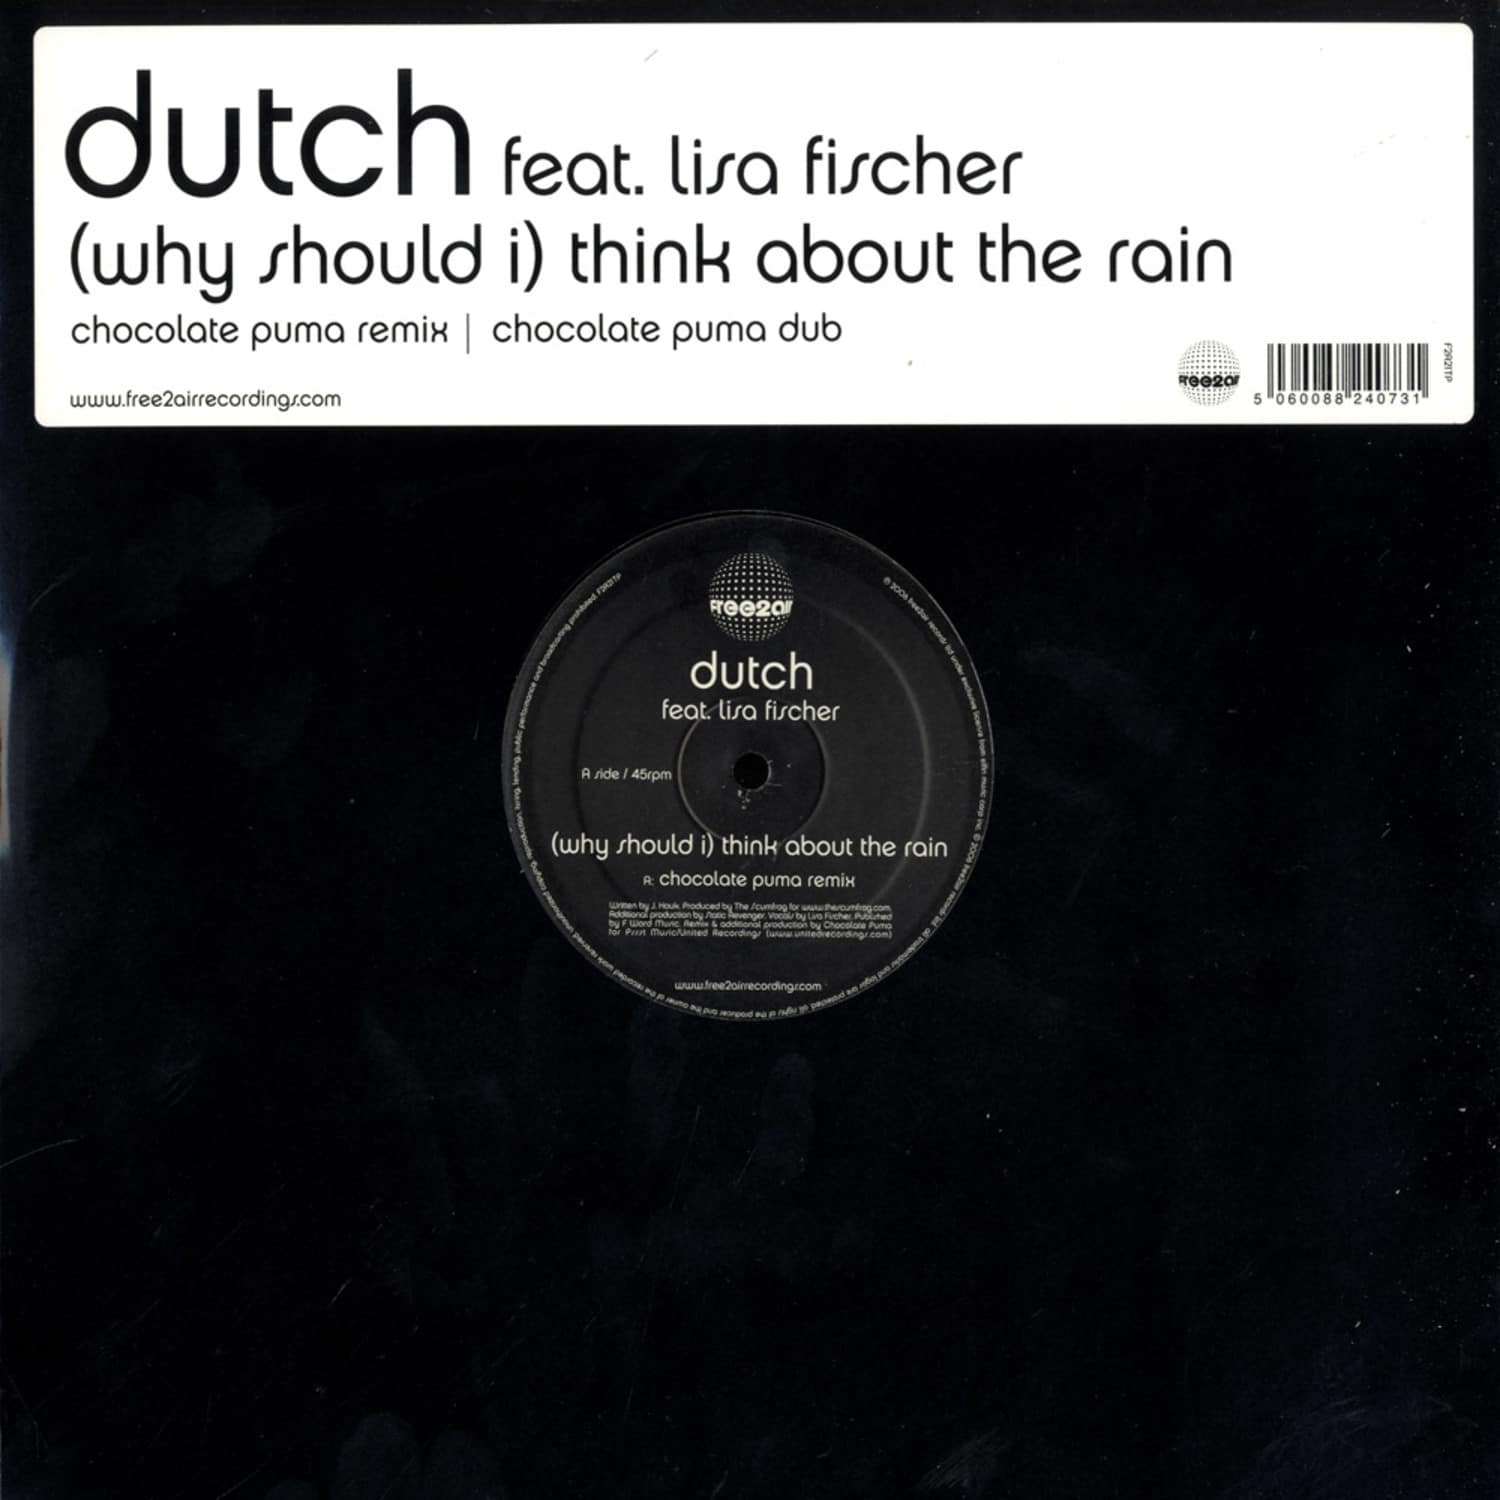 Dutch feat. Lisa Fischer - WHY SHOULD I?) THINK ABOUT THE RAIN